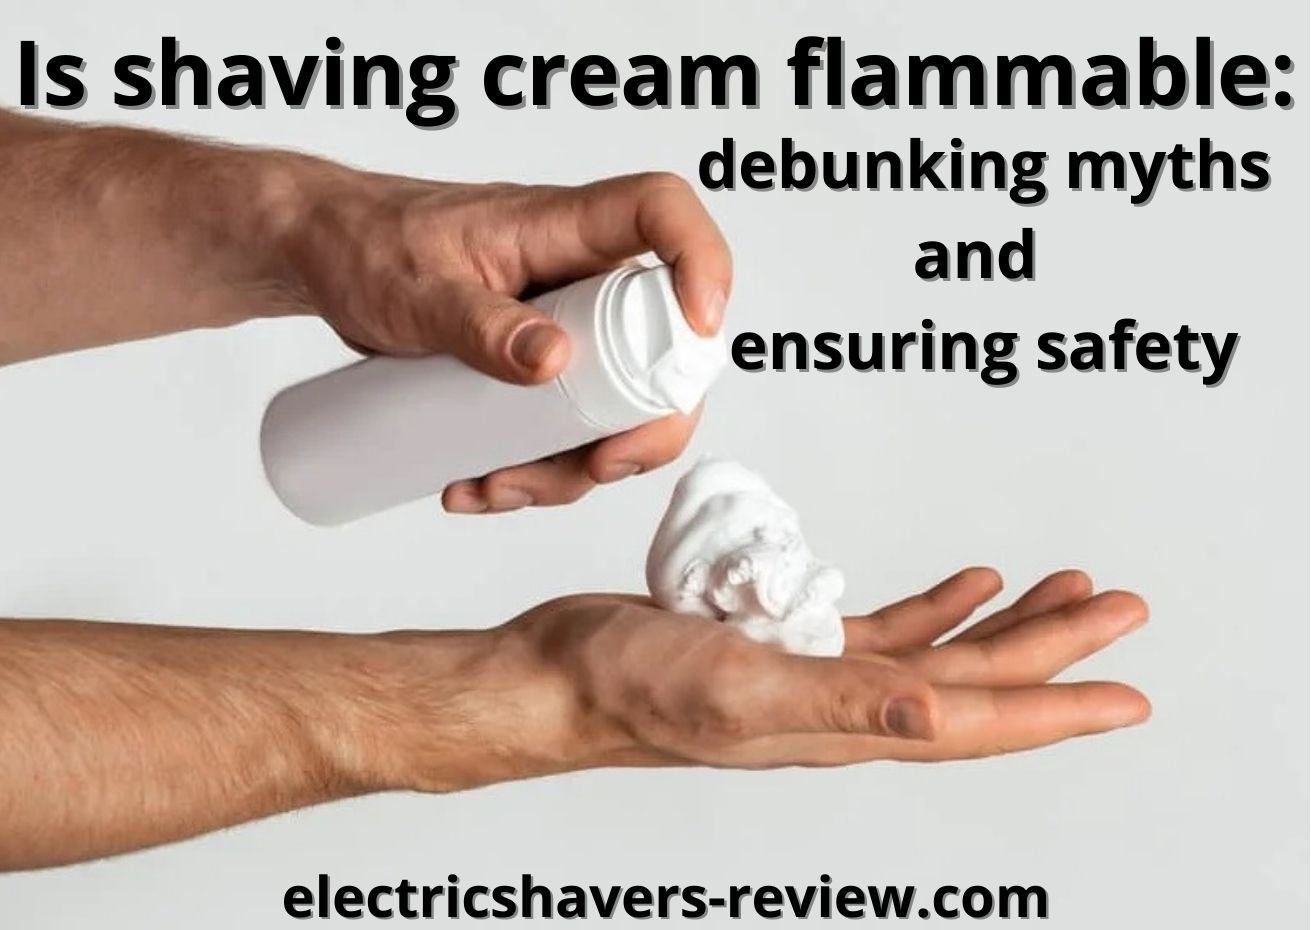 Is shaving cream flammable? The best guide to use it safely